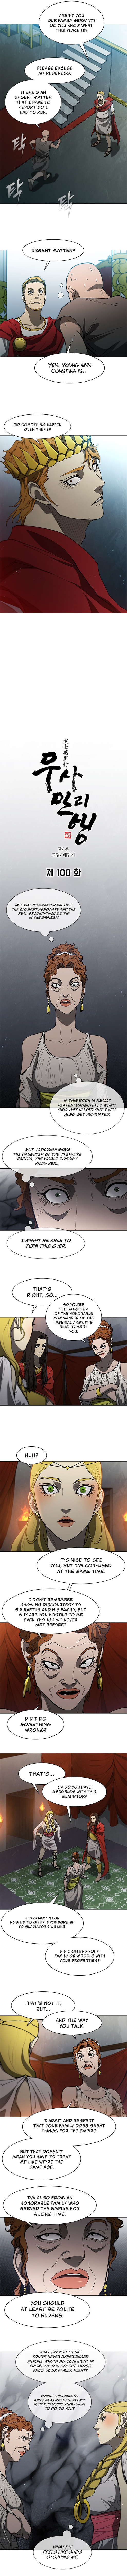 Long Way of the Warrior - Chapter 100 Page 3